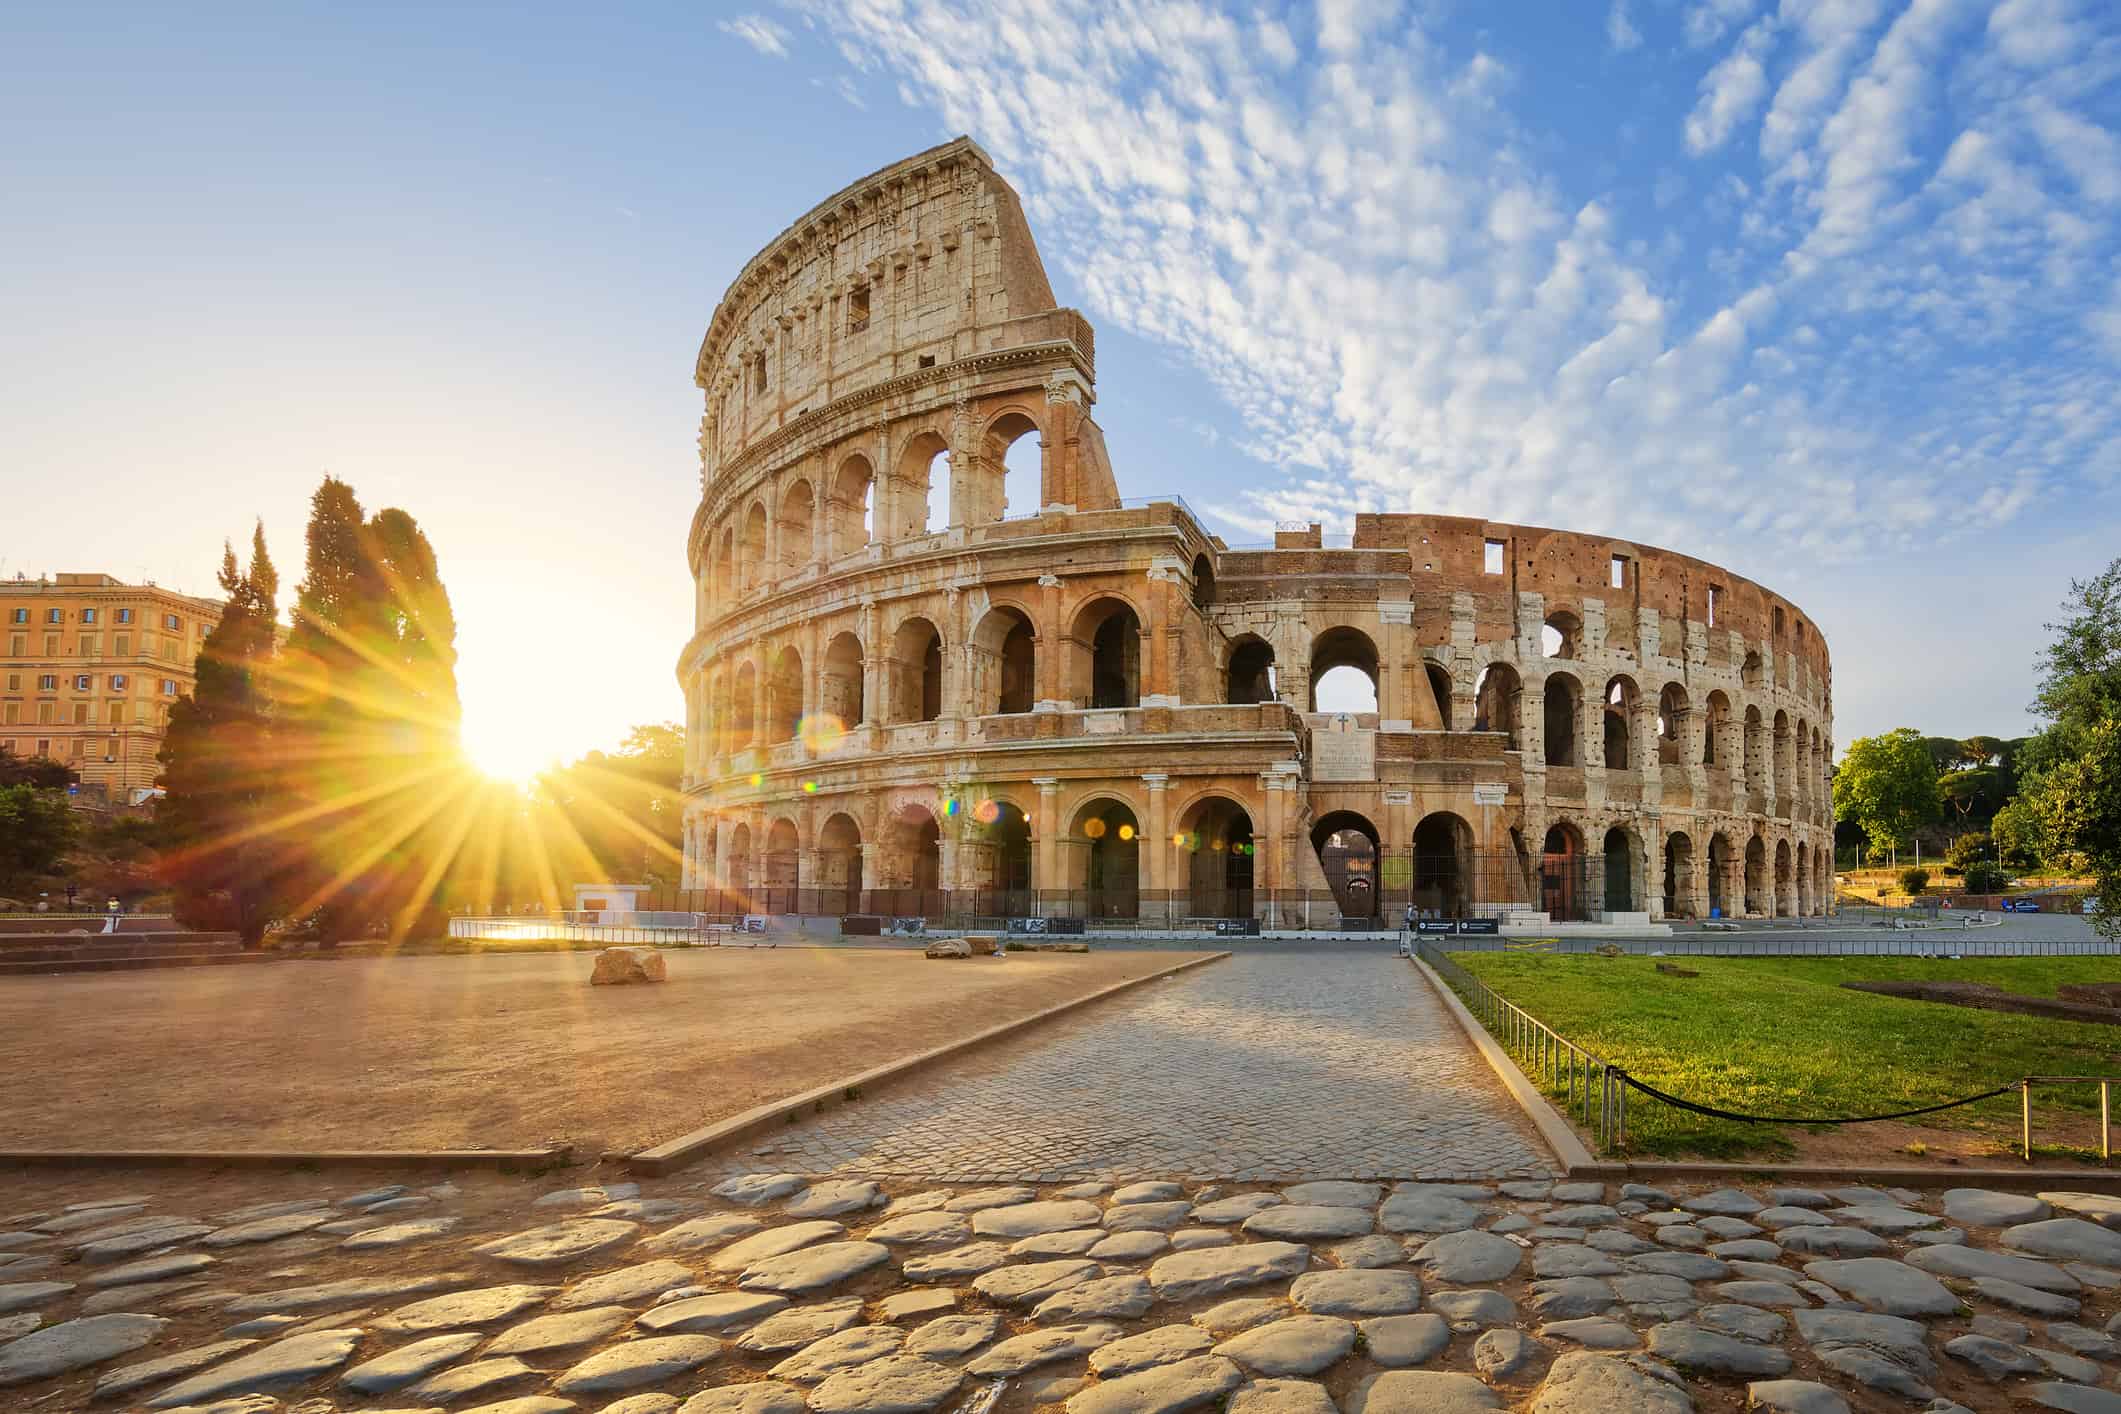 View of Colosseum in Rome. Image credit: vwalakte/iStock